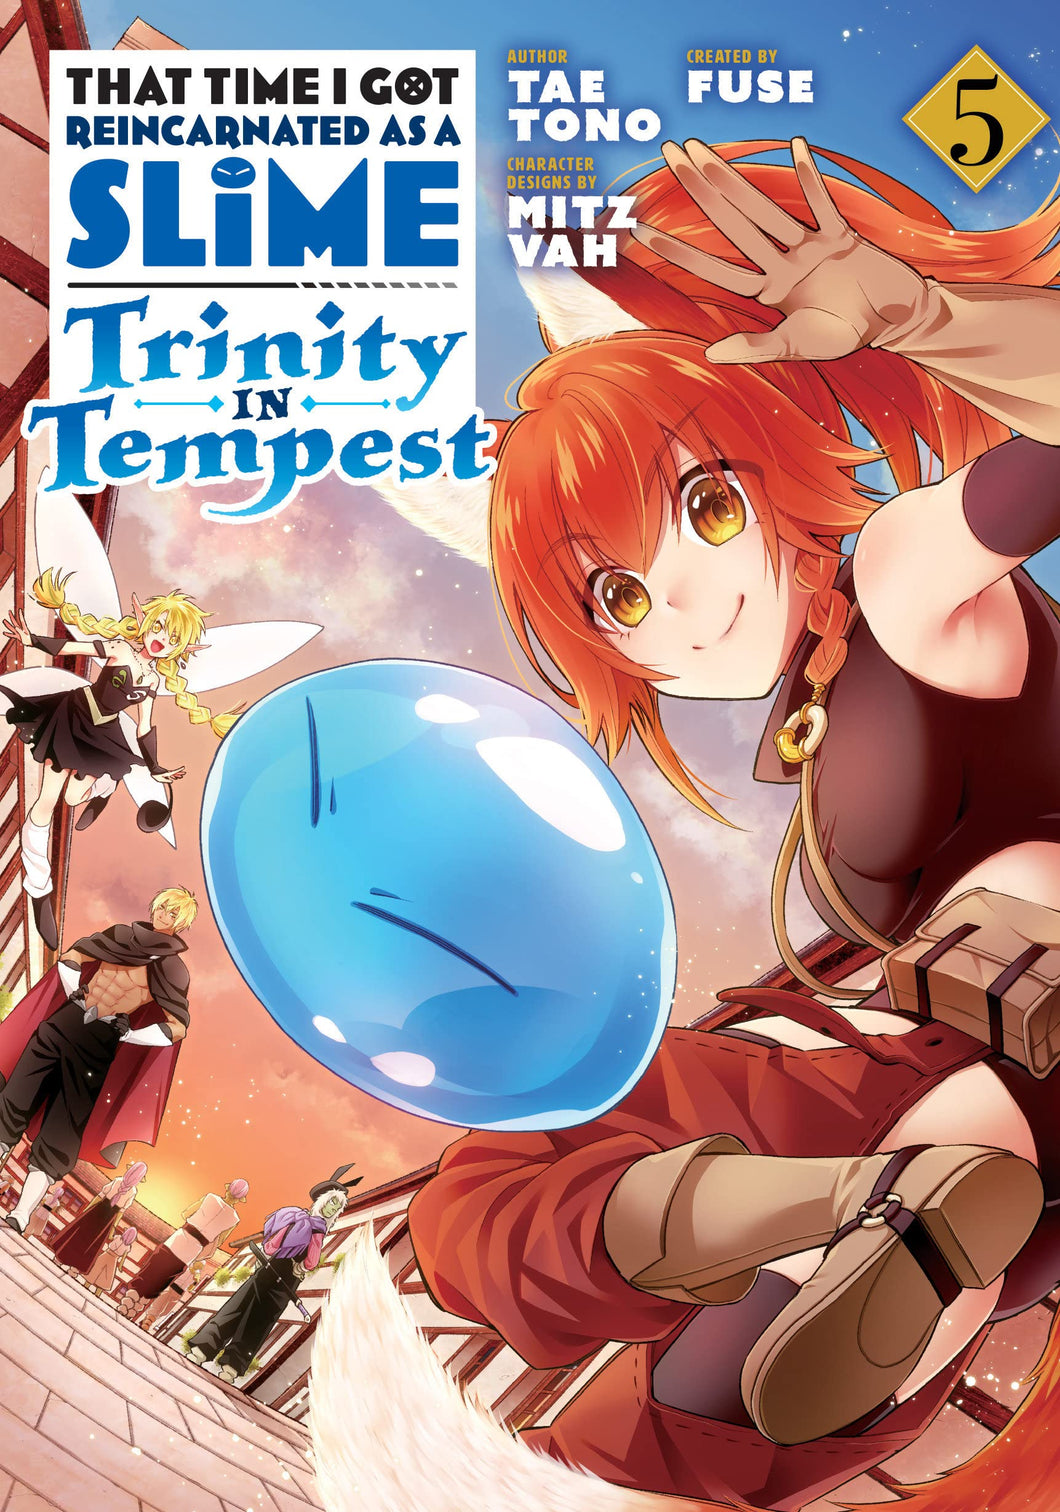 That Time I Got Reincarnated as a Slime Trinity in Tempest Volume 5